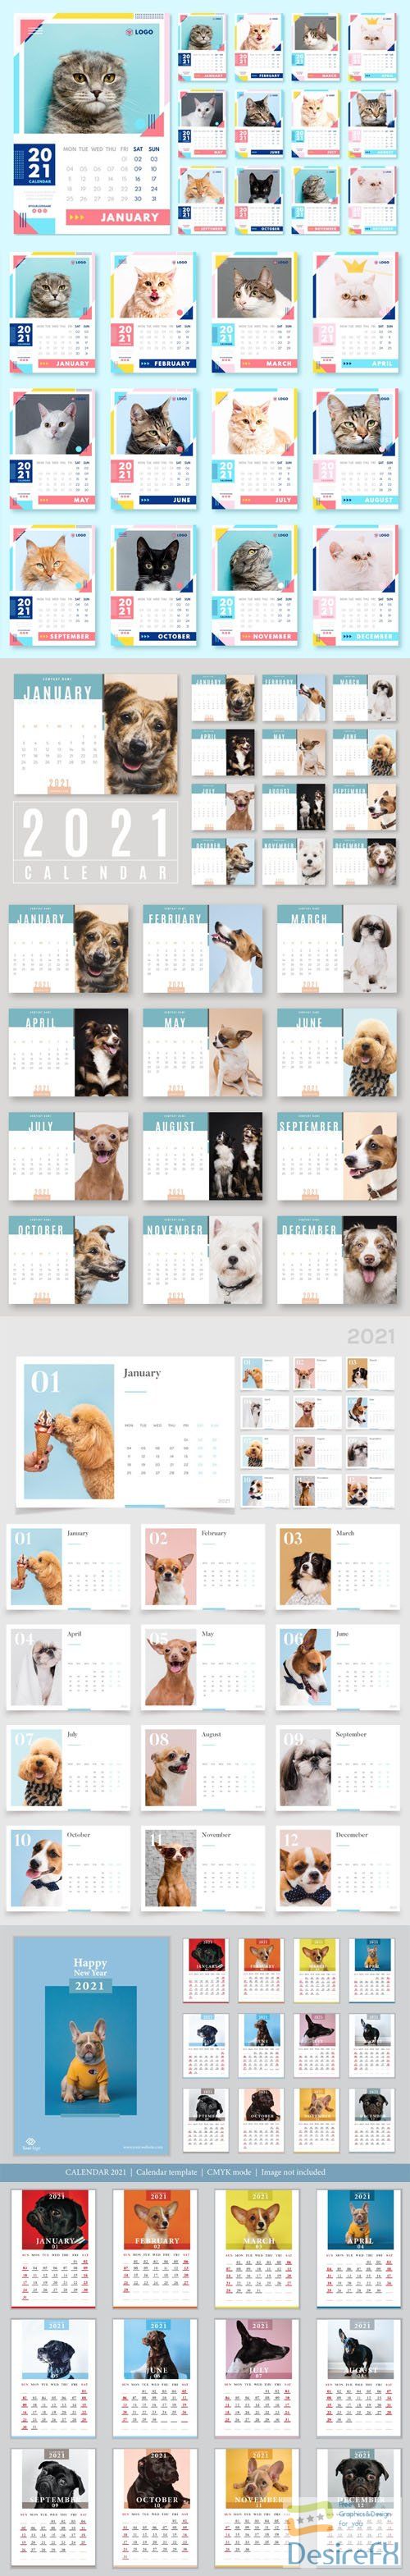 2021 Calendars Vector Templates with Cute Animals